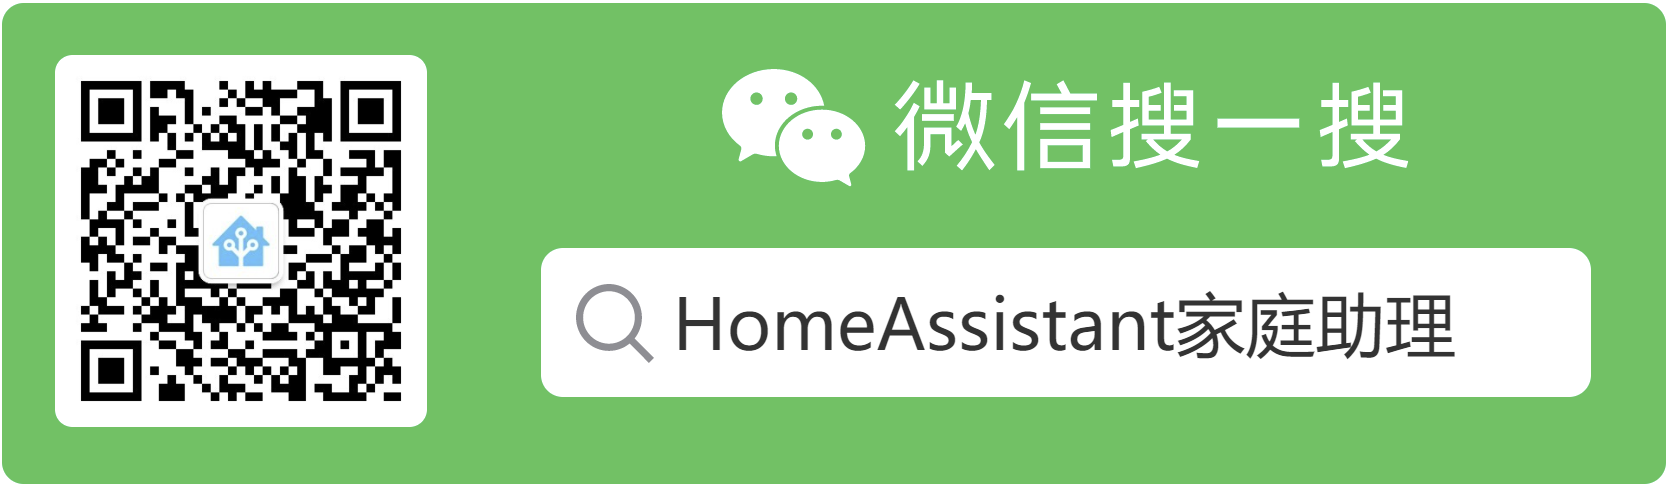 HomeAssistant家庭助理